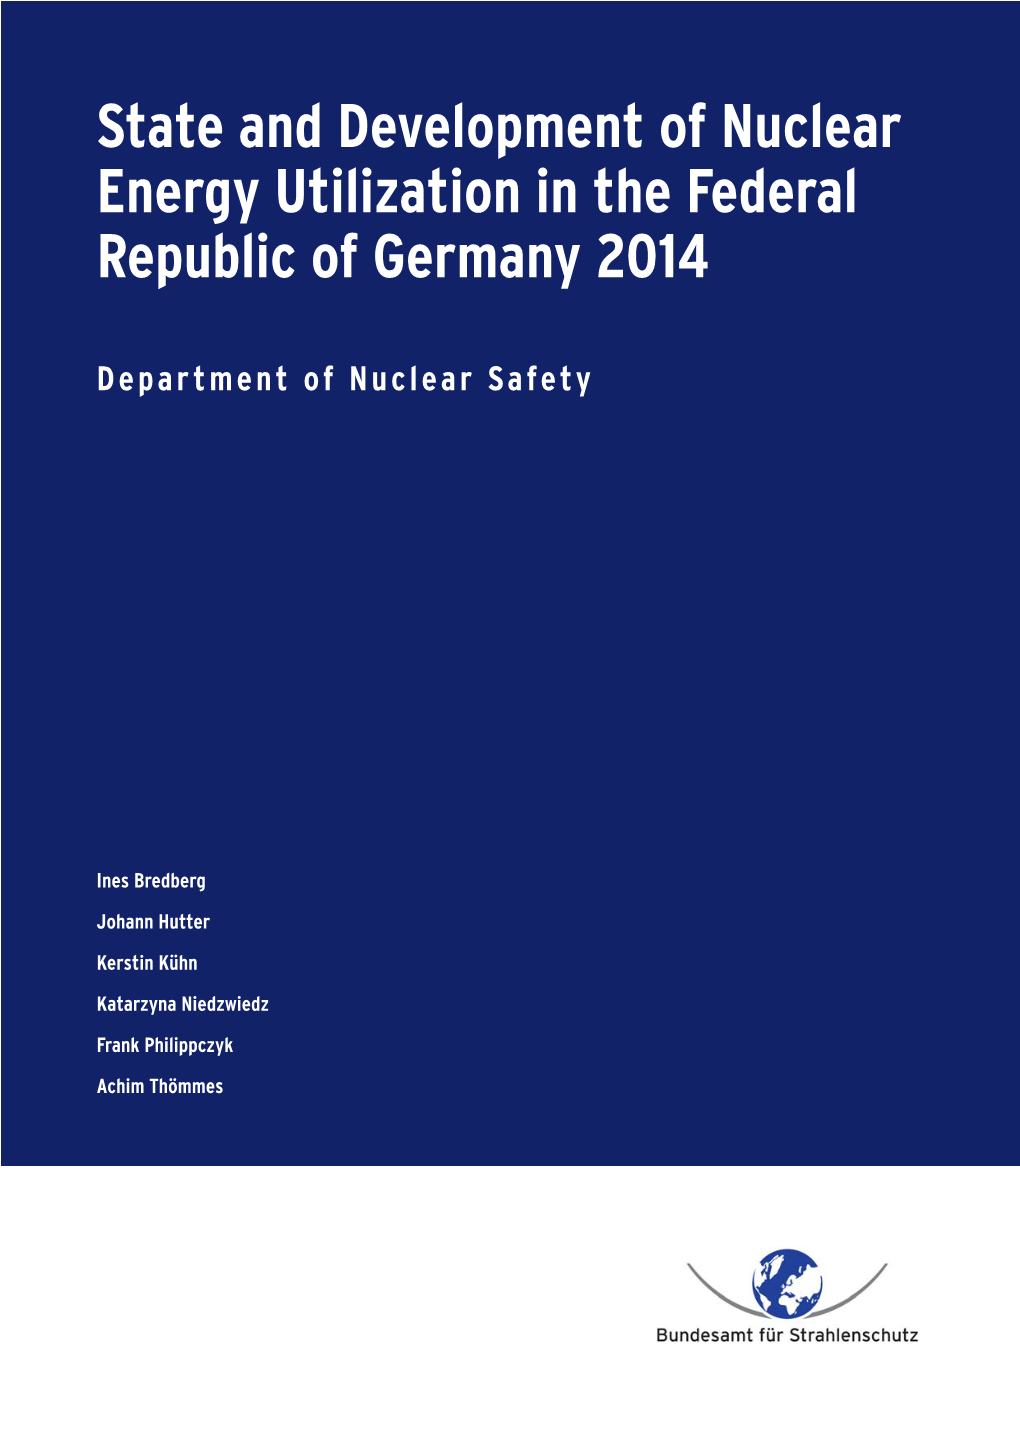 State and Development of Nuclear Energy Utilization in the Federal Republic of Germany 2014